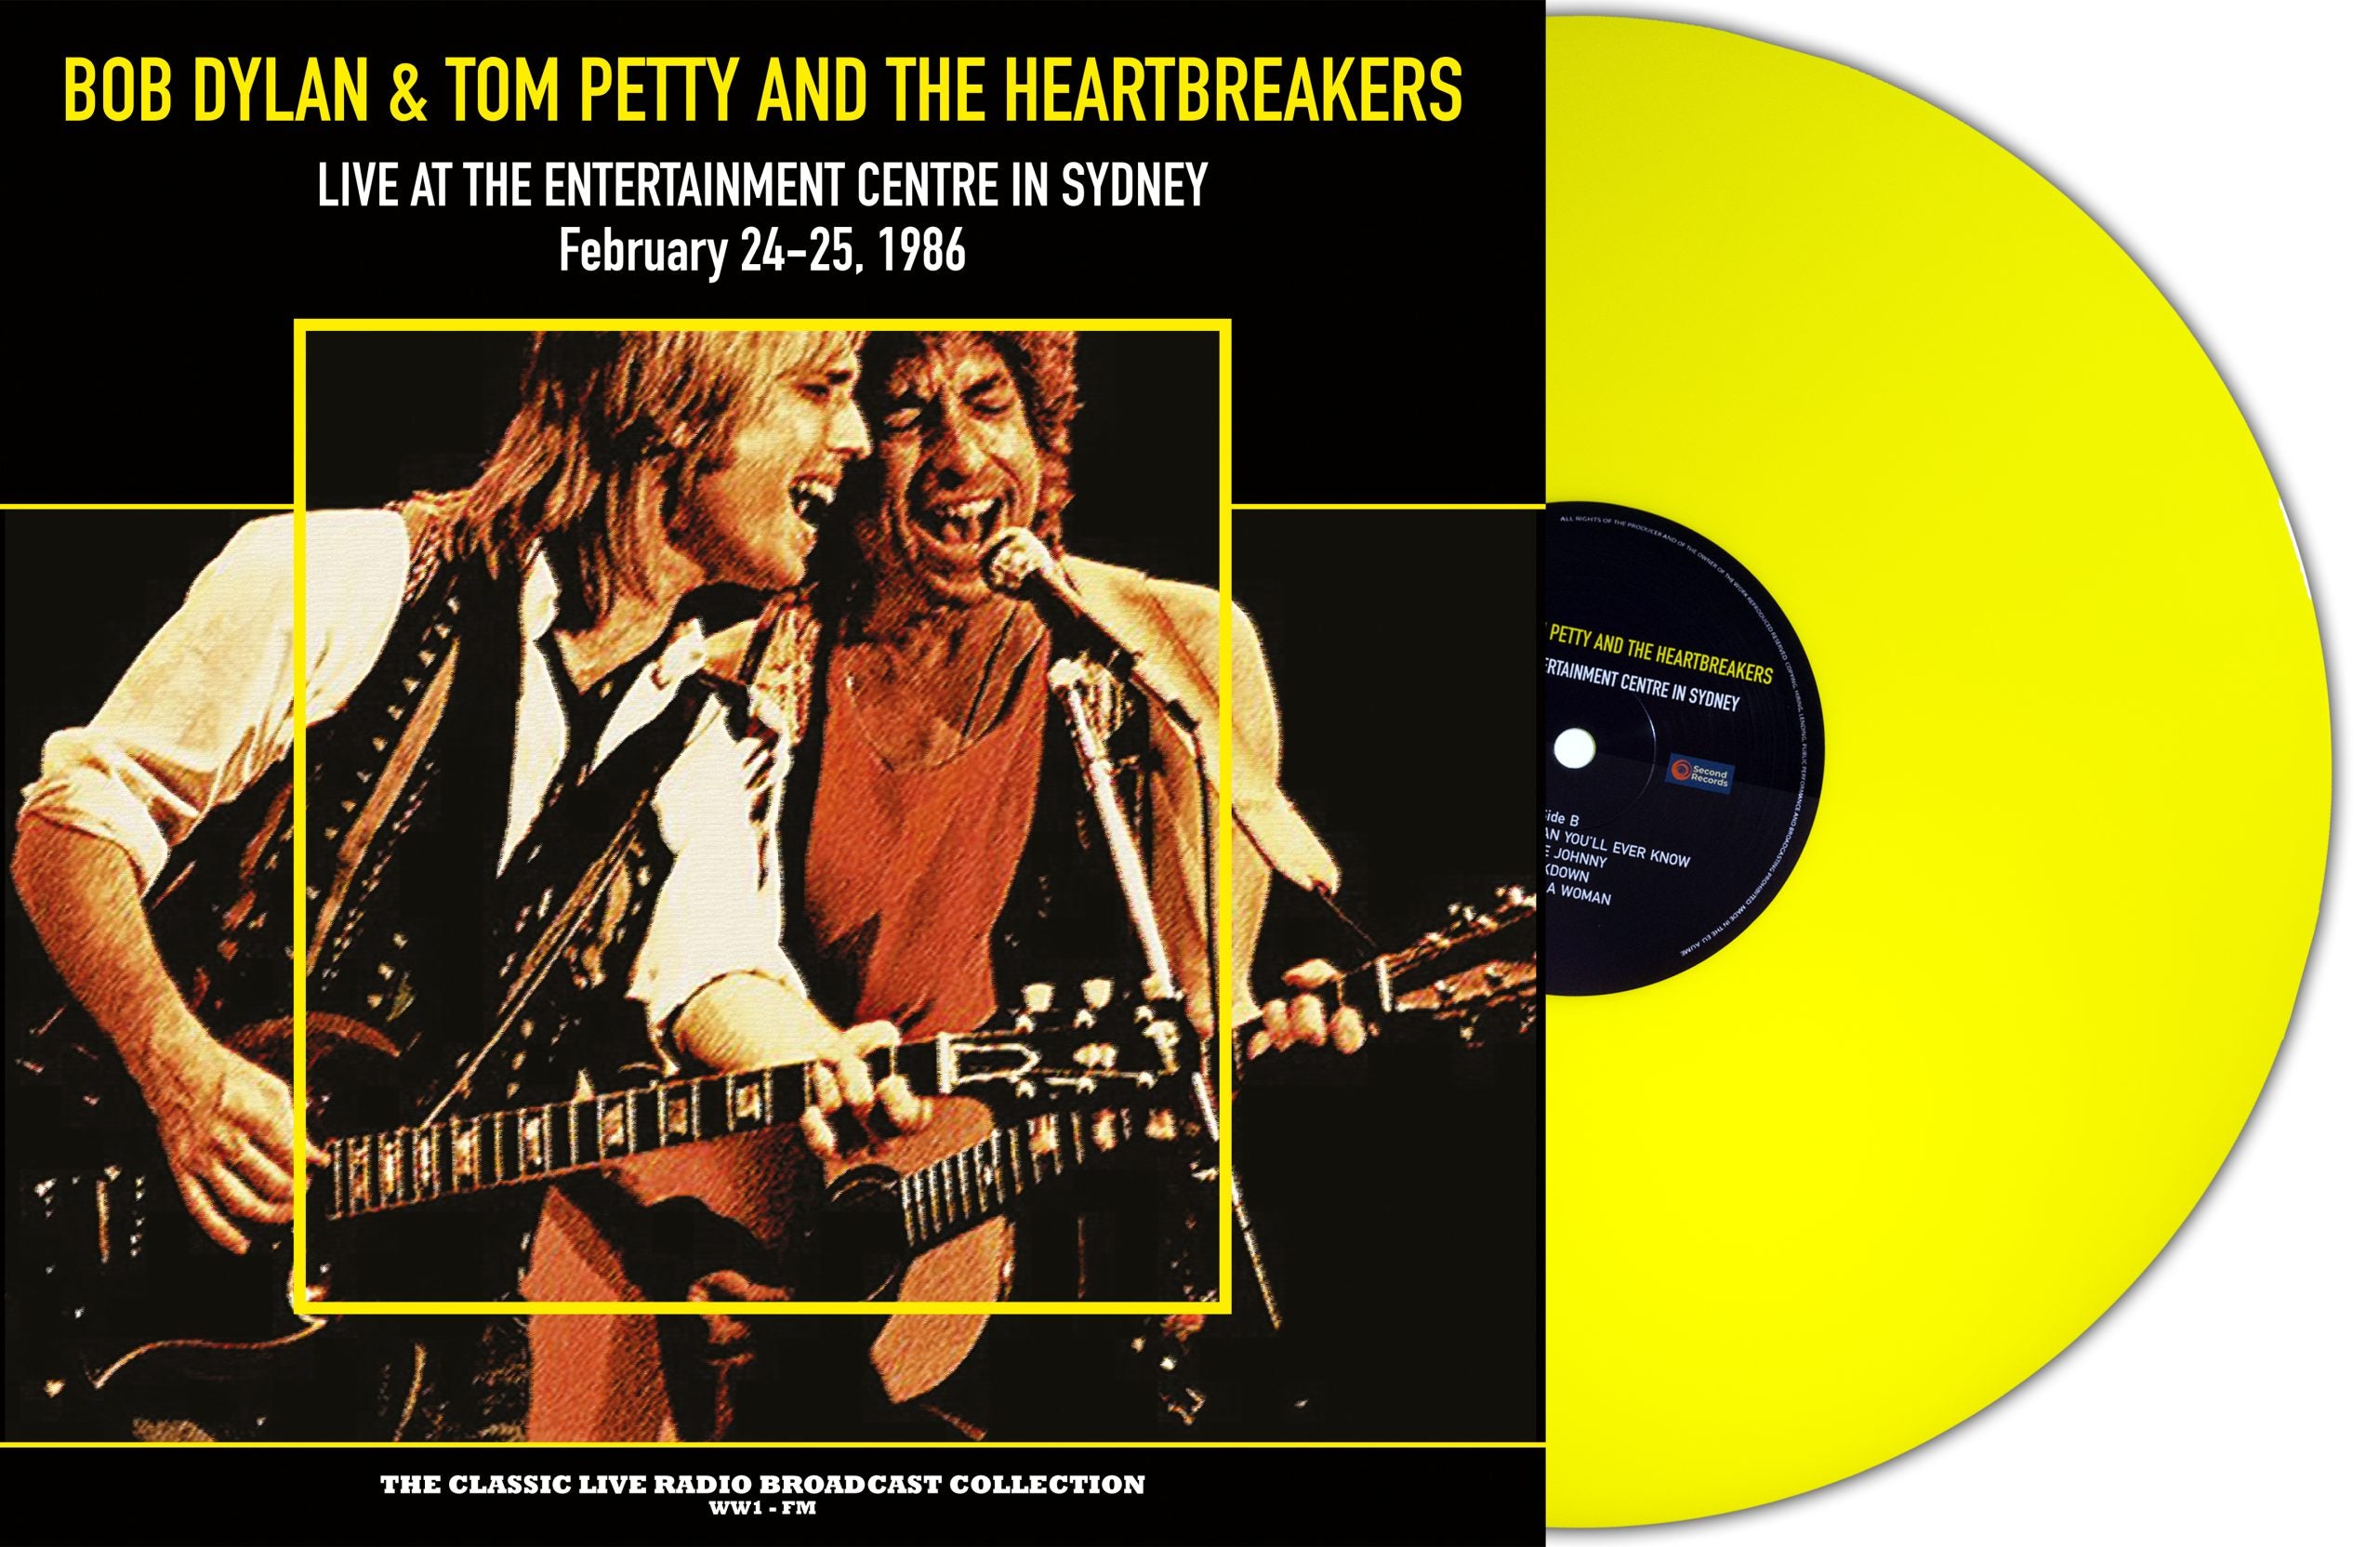 Bob Dylan/Tom Petty & The Heartbreakers - Live At The Entertainment Centre Sydney 1986 [2LP] Limited 180gram Yellow Colored Vinyl